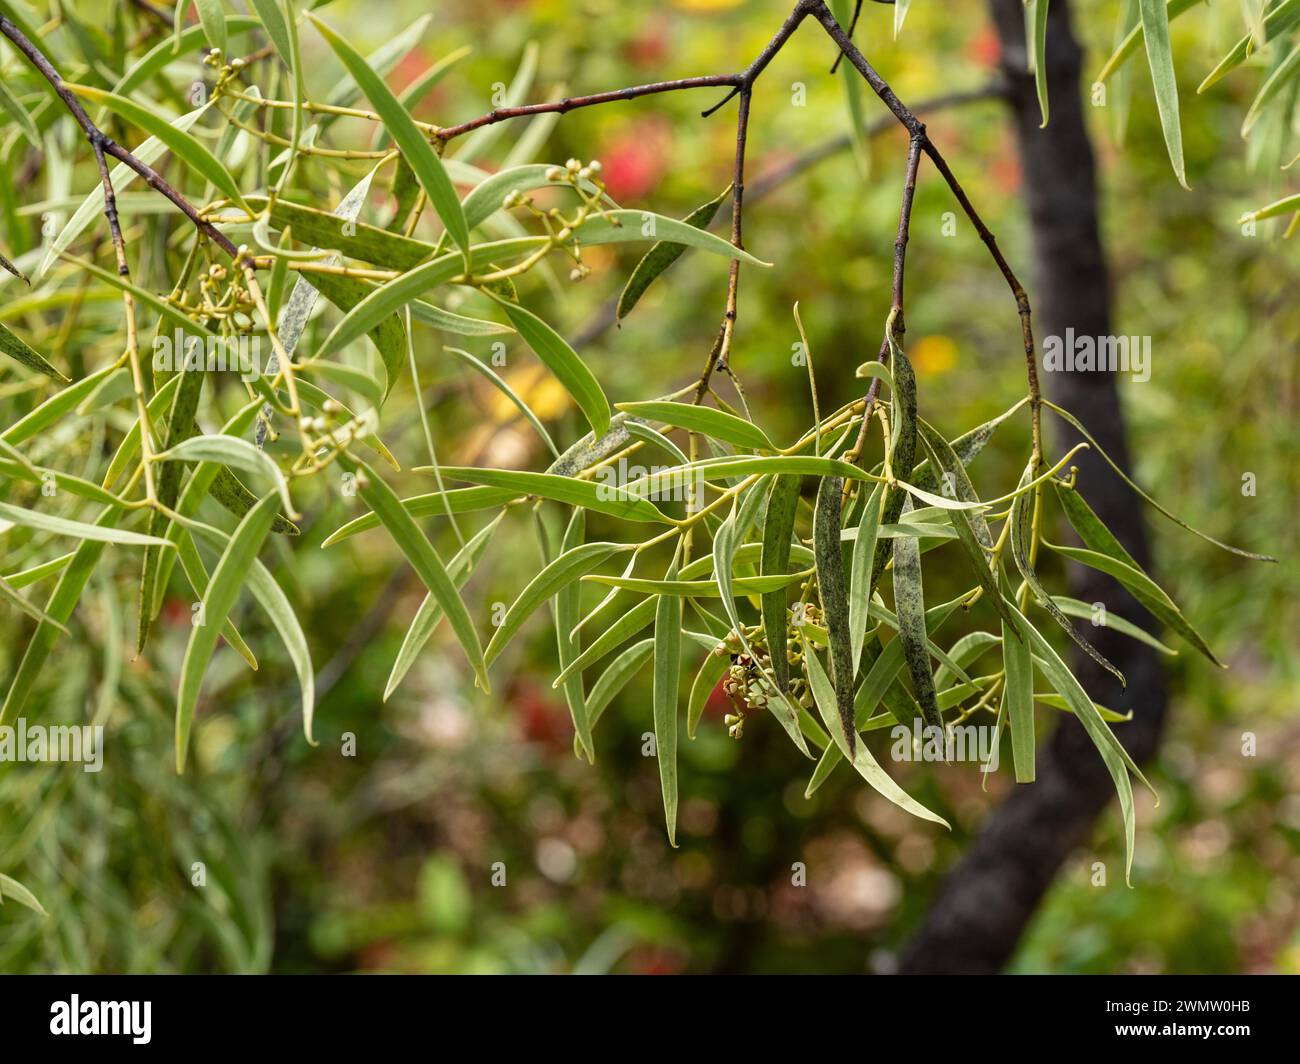 Green leaves of the Quandong tree, Australian native plant Stock Photo